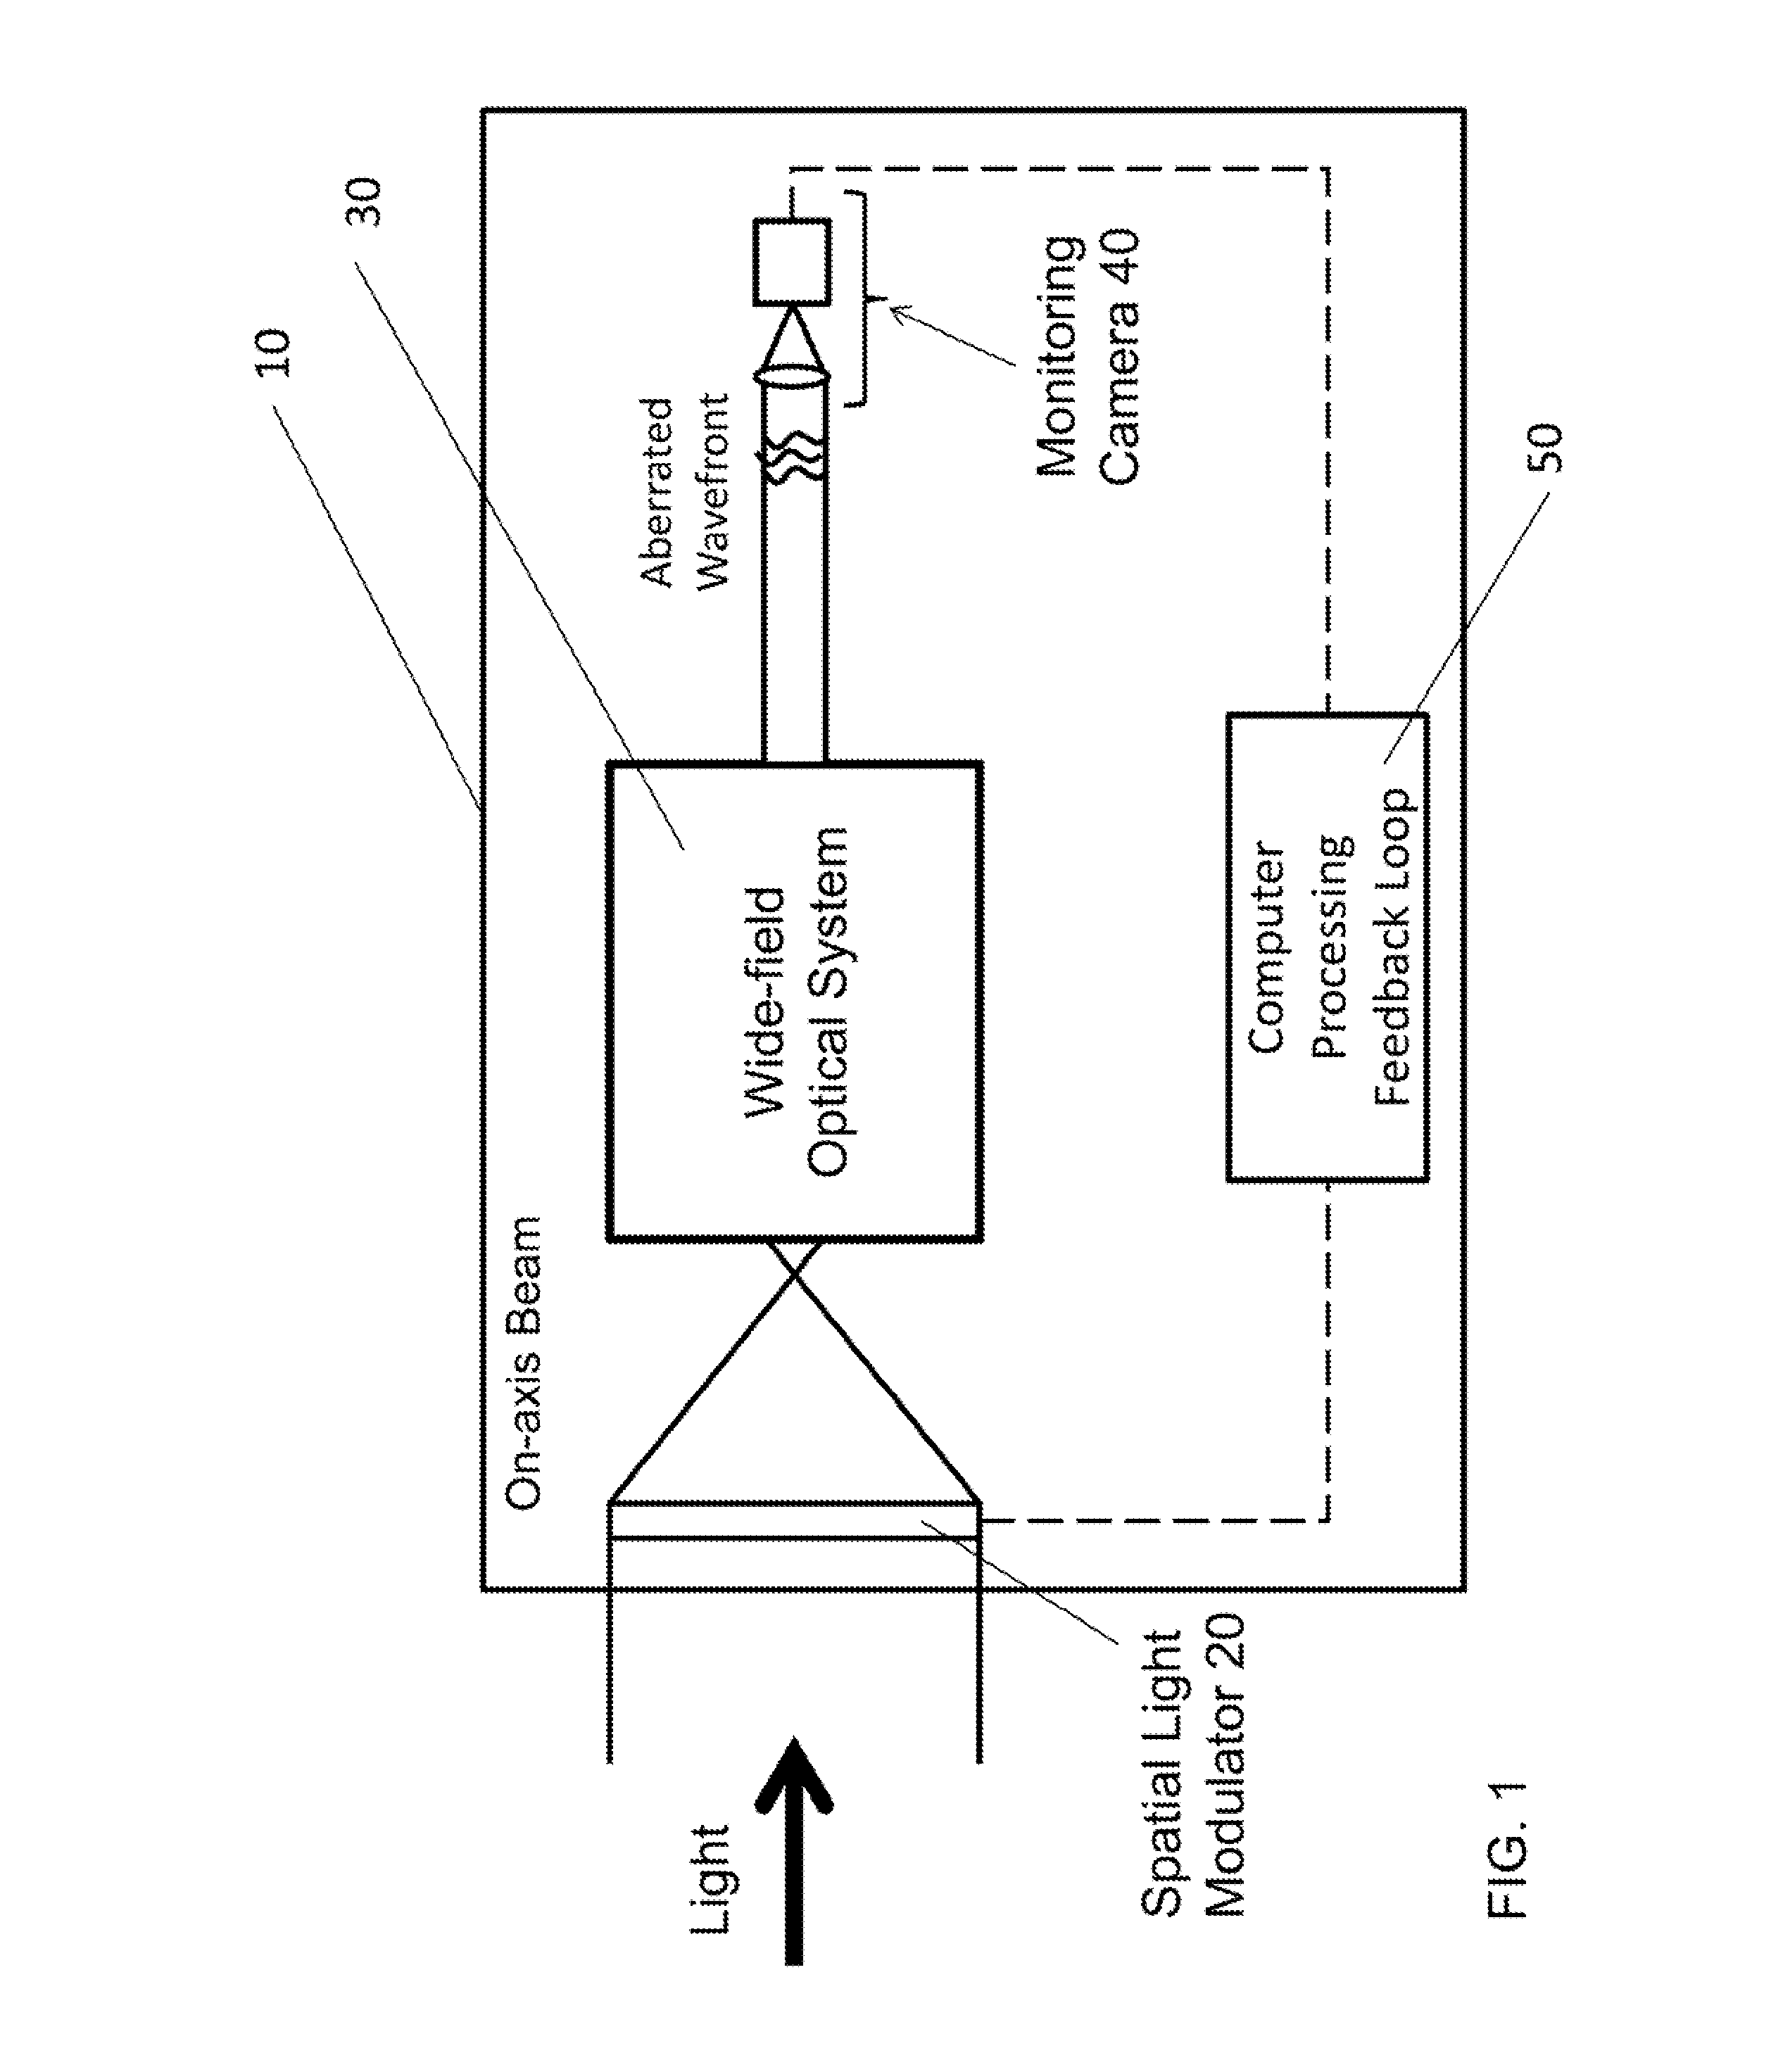 Method and apparatus of simultaneous spatial light modulator beam steering and system aberration correction